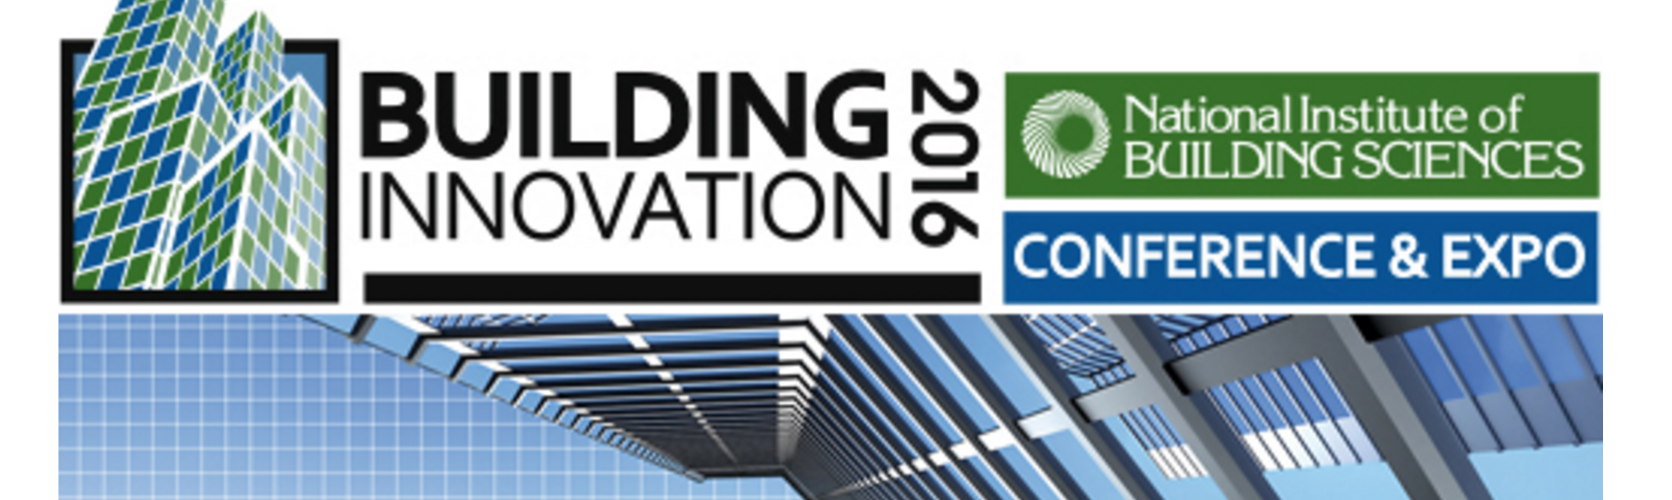 Building Innovation FM Conference and Expo 2016